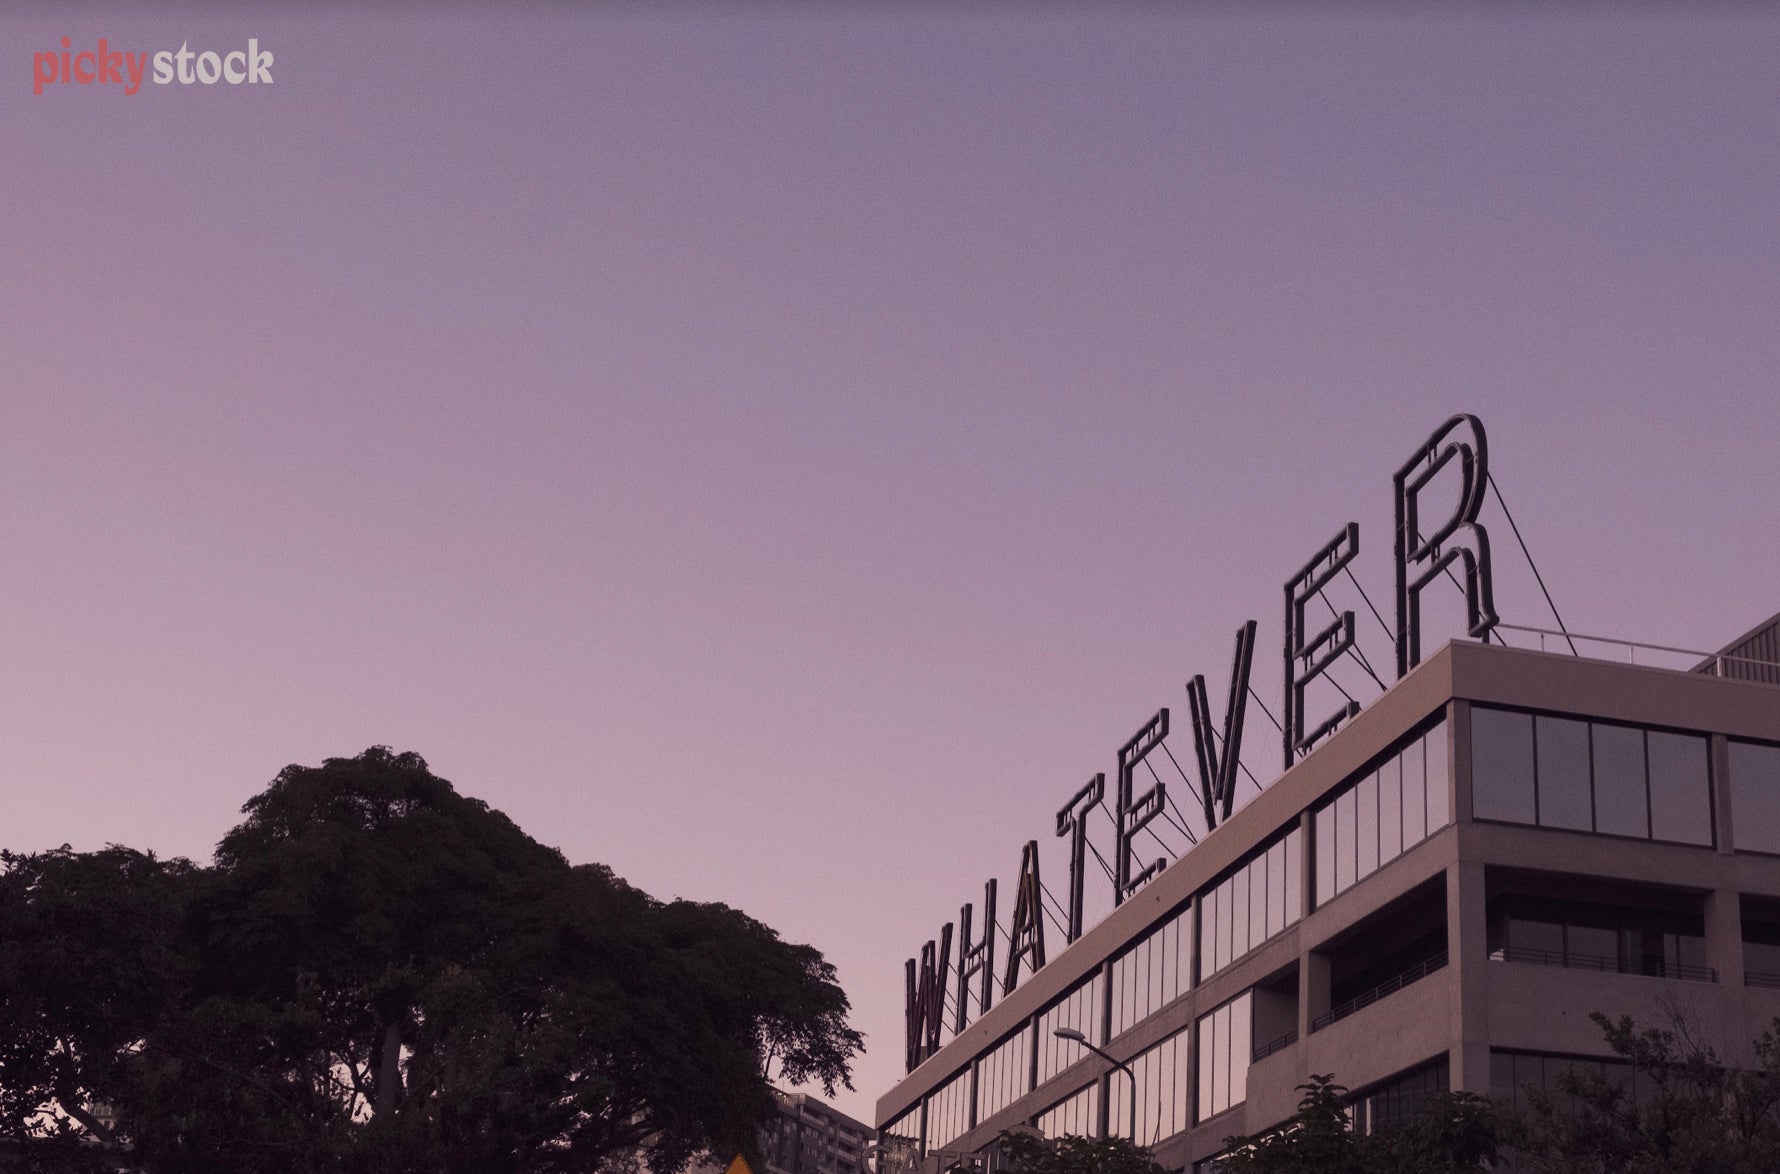 A landscape of a grey building with a large metal sign reading ‘Whatever’, the windows reflect the lilac hues of the afternoon sky.